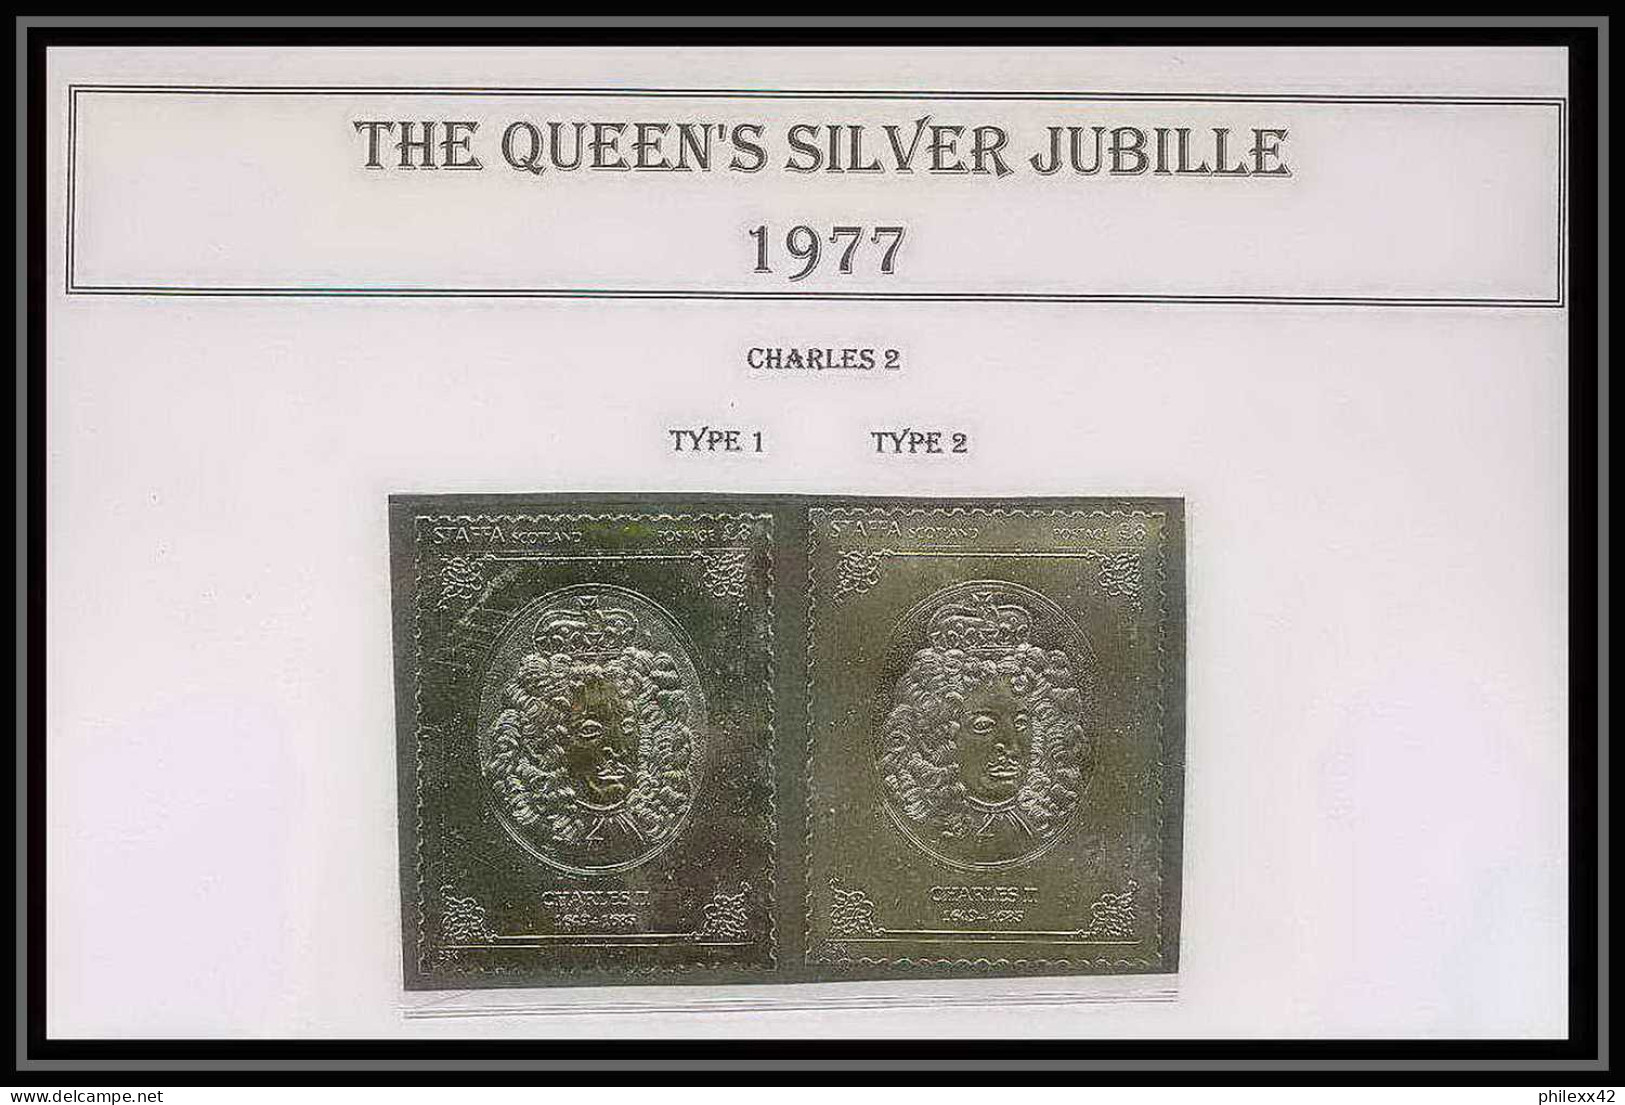 446a Staffa Scotland The Queen's Silver Jubilee 1977 OR Gold Stamps Monarchy United Kingdom Charles 2 Type 1&2 ** - Lokale Uitgaven